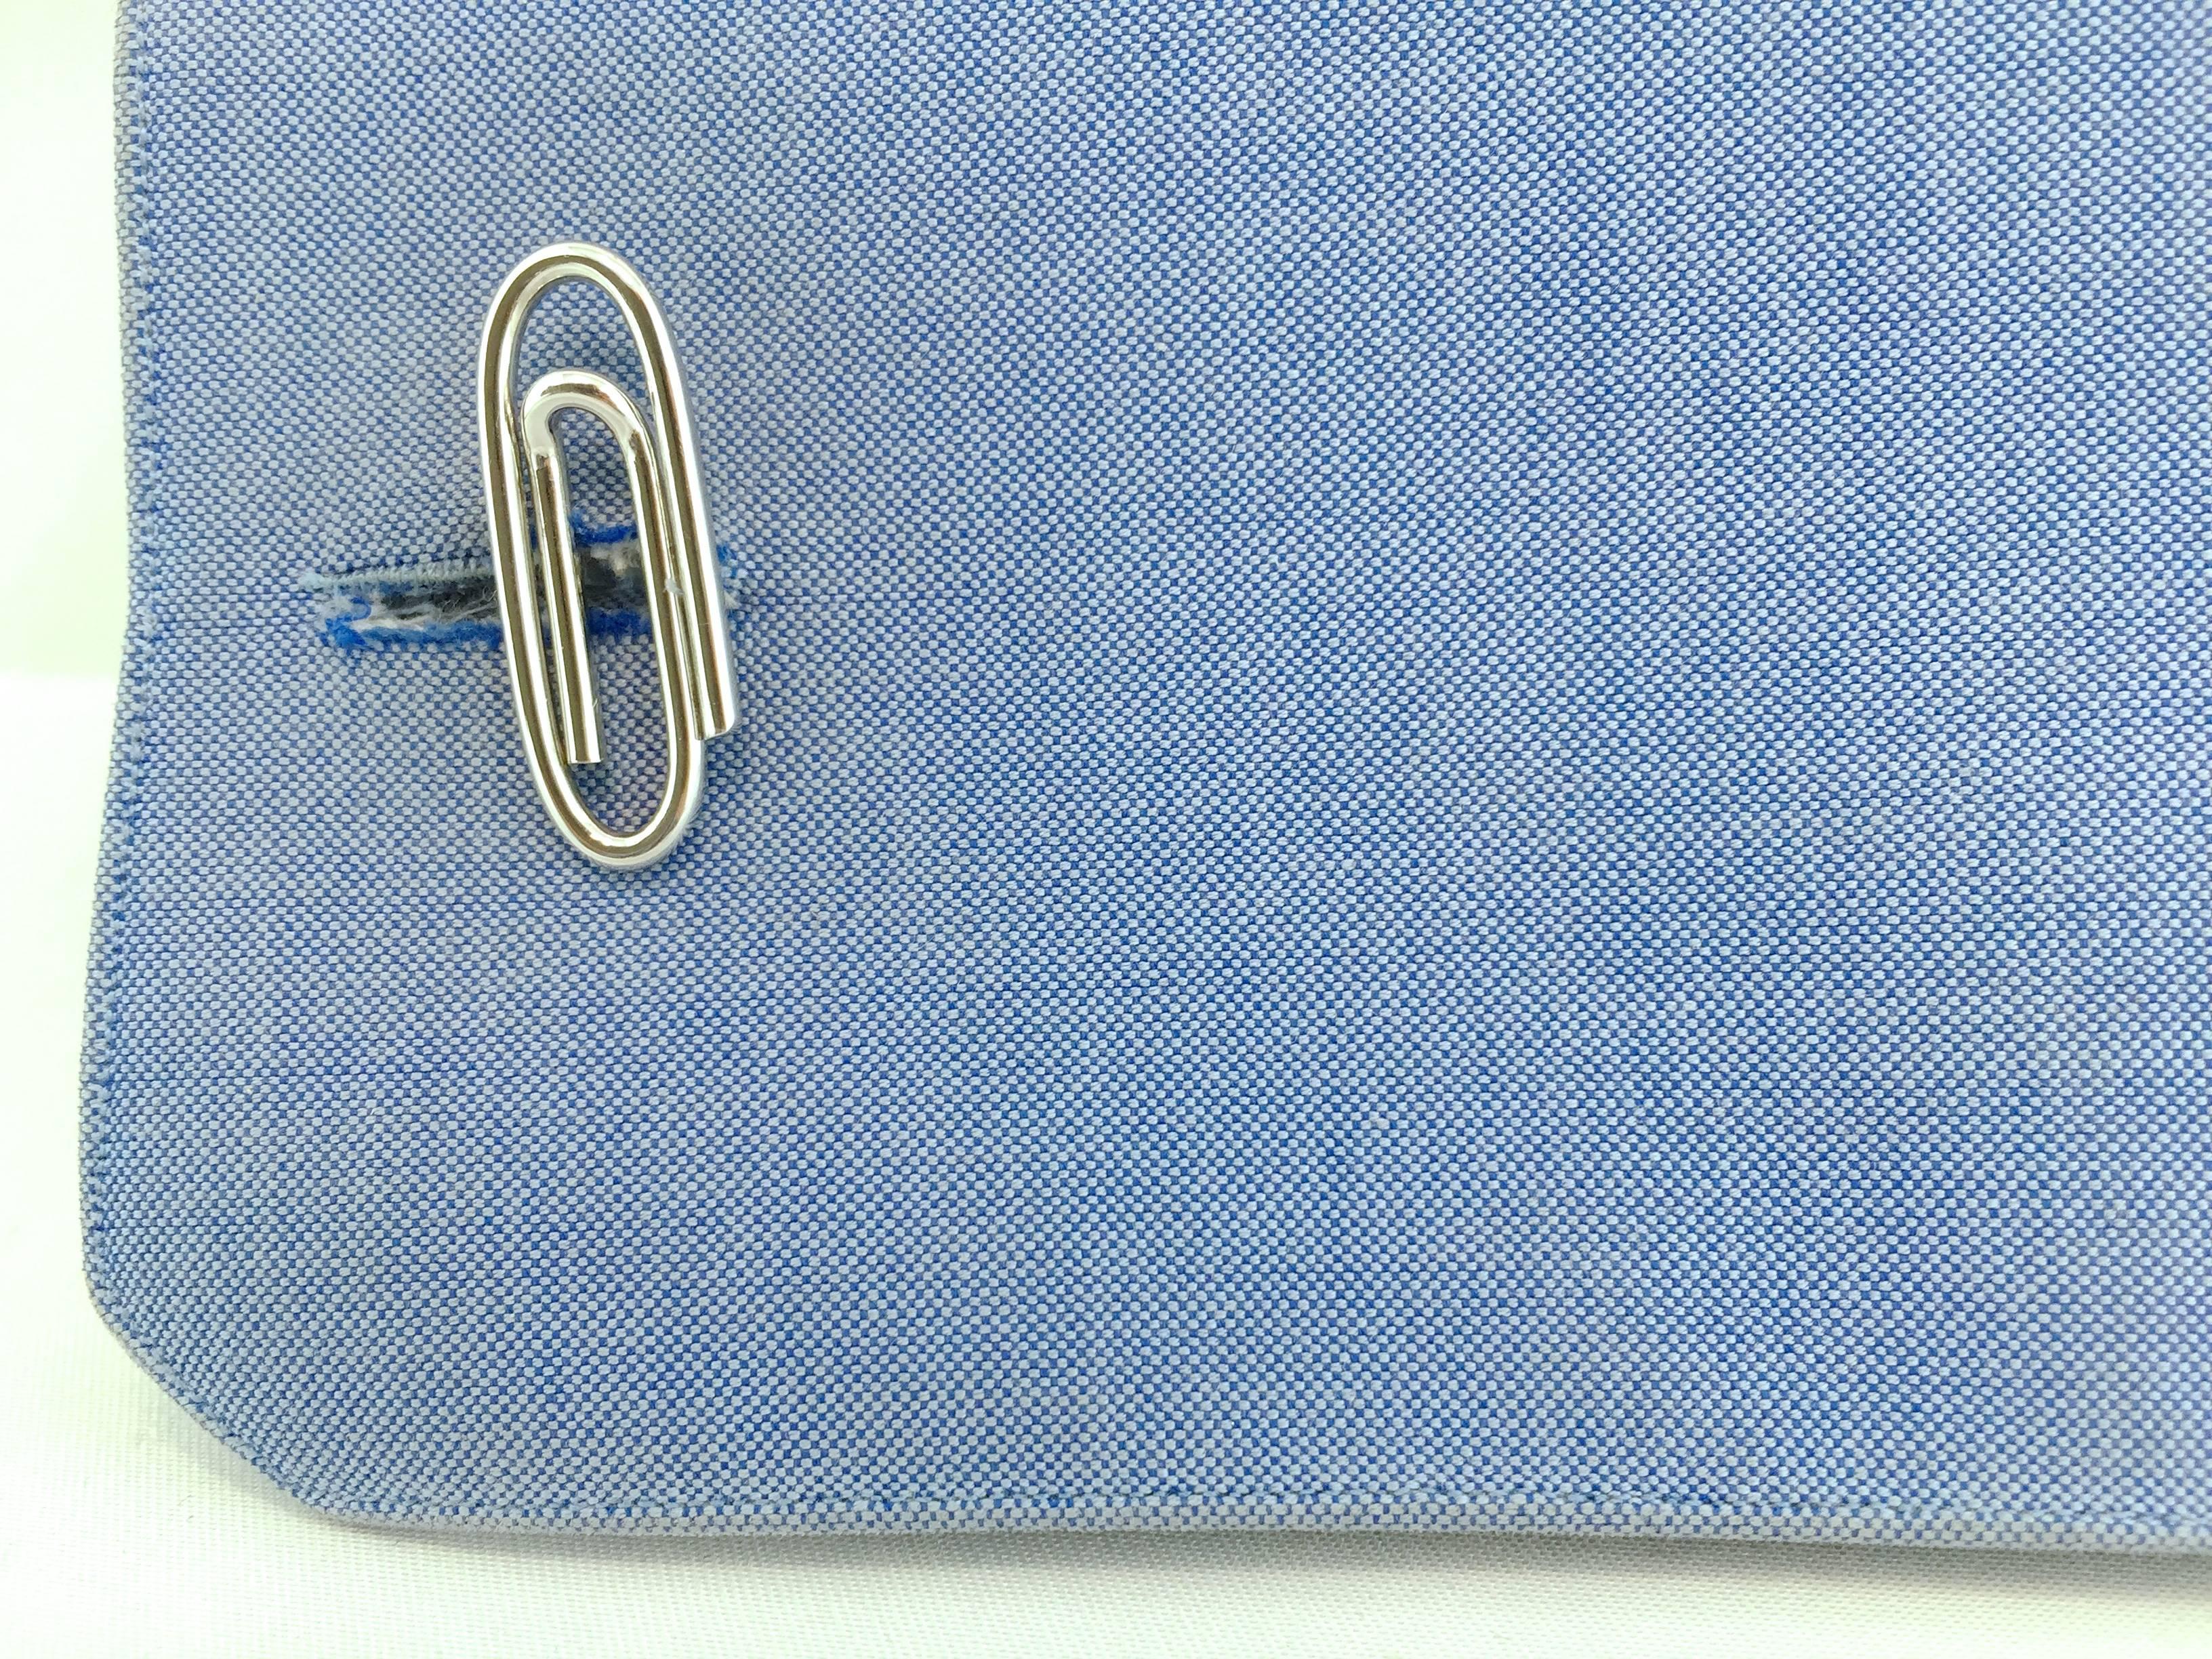 Jona design collection, hand crafted in Italy, Sterling silver paperclip cufflinks with toggle back. Marked 